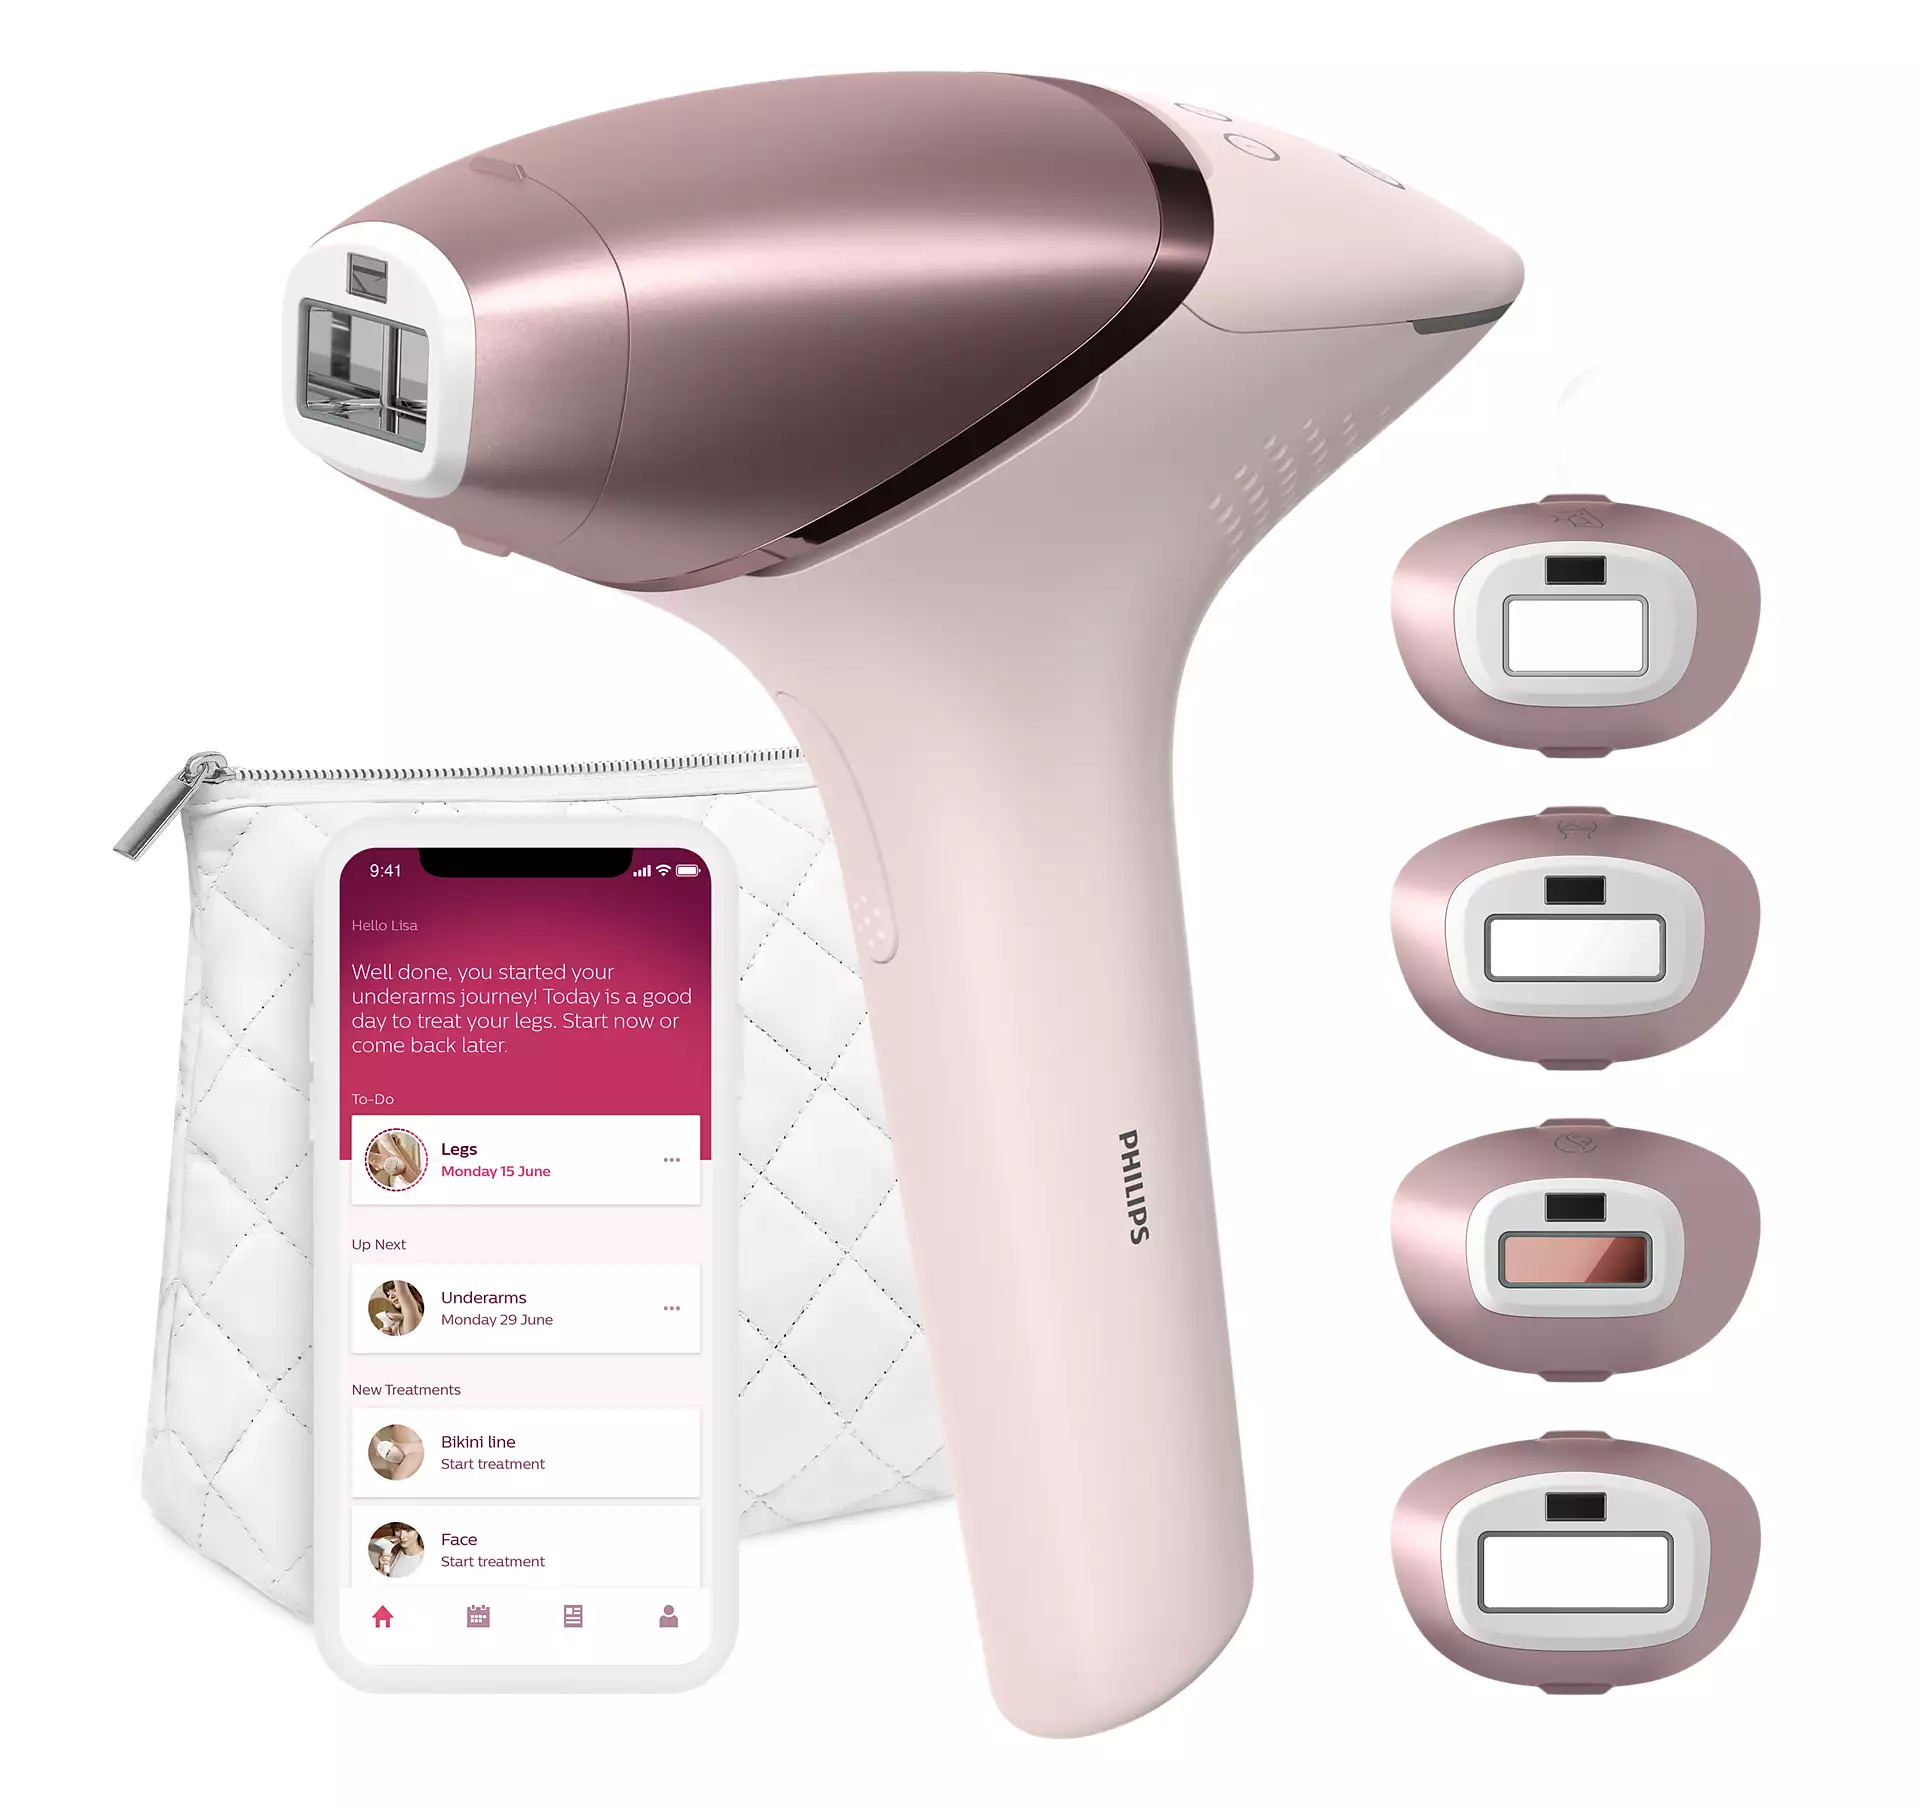 Buy Philips Lumea hair removal device?